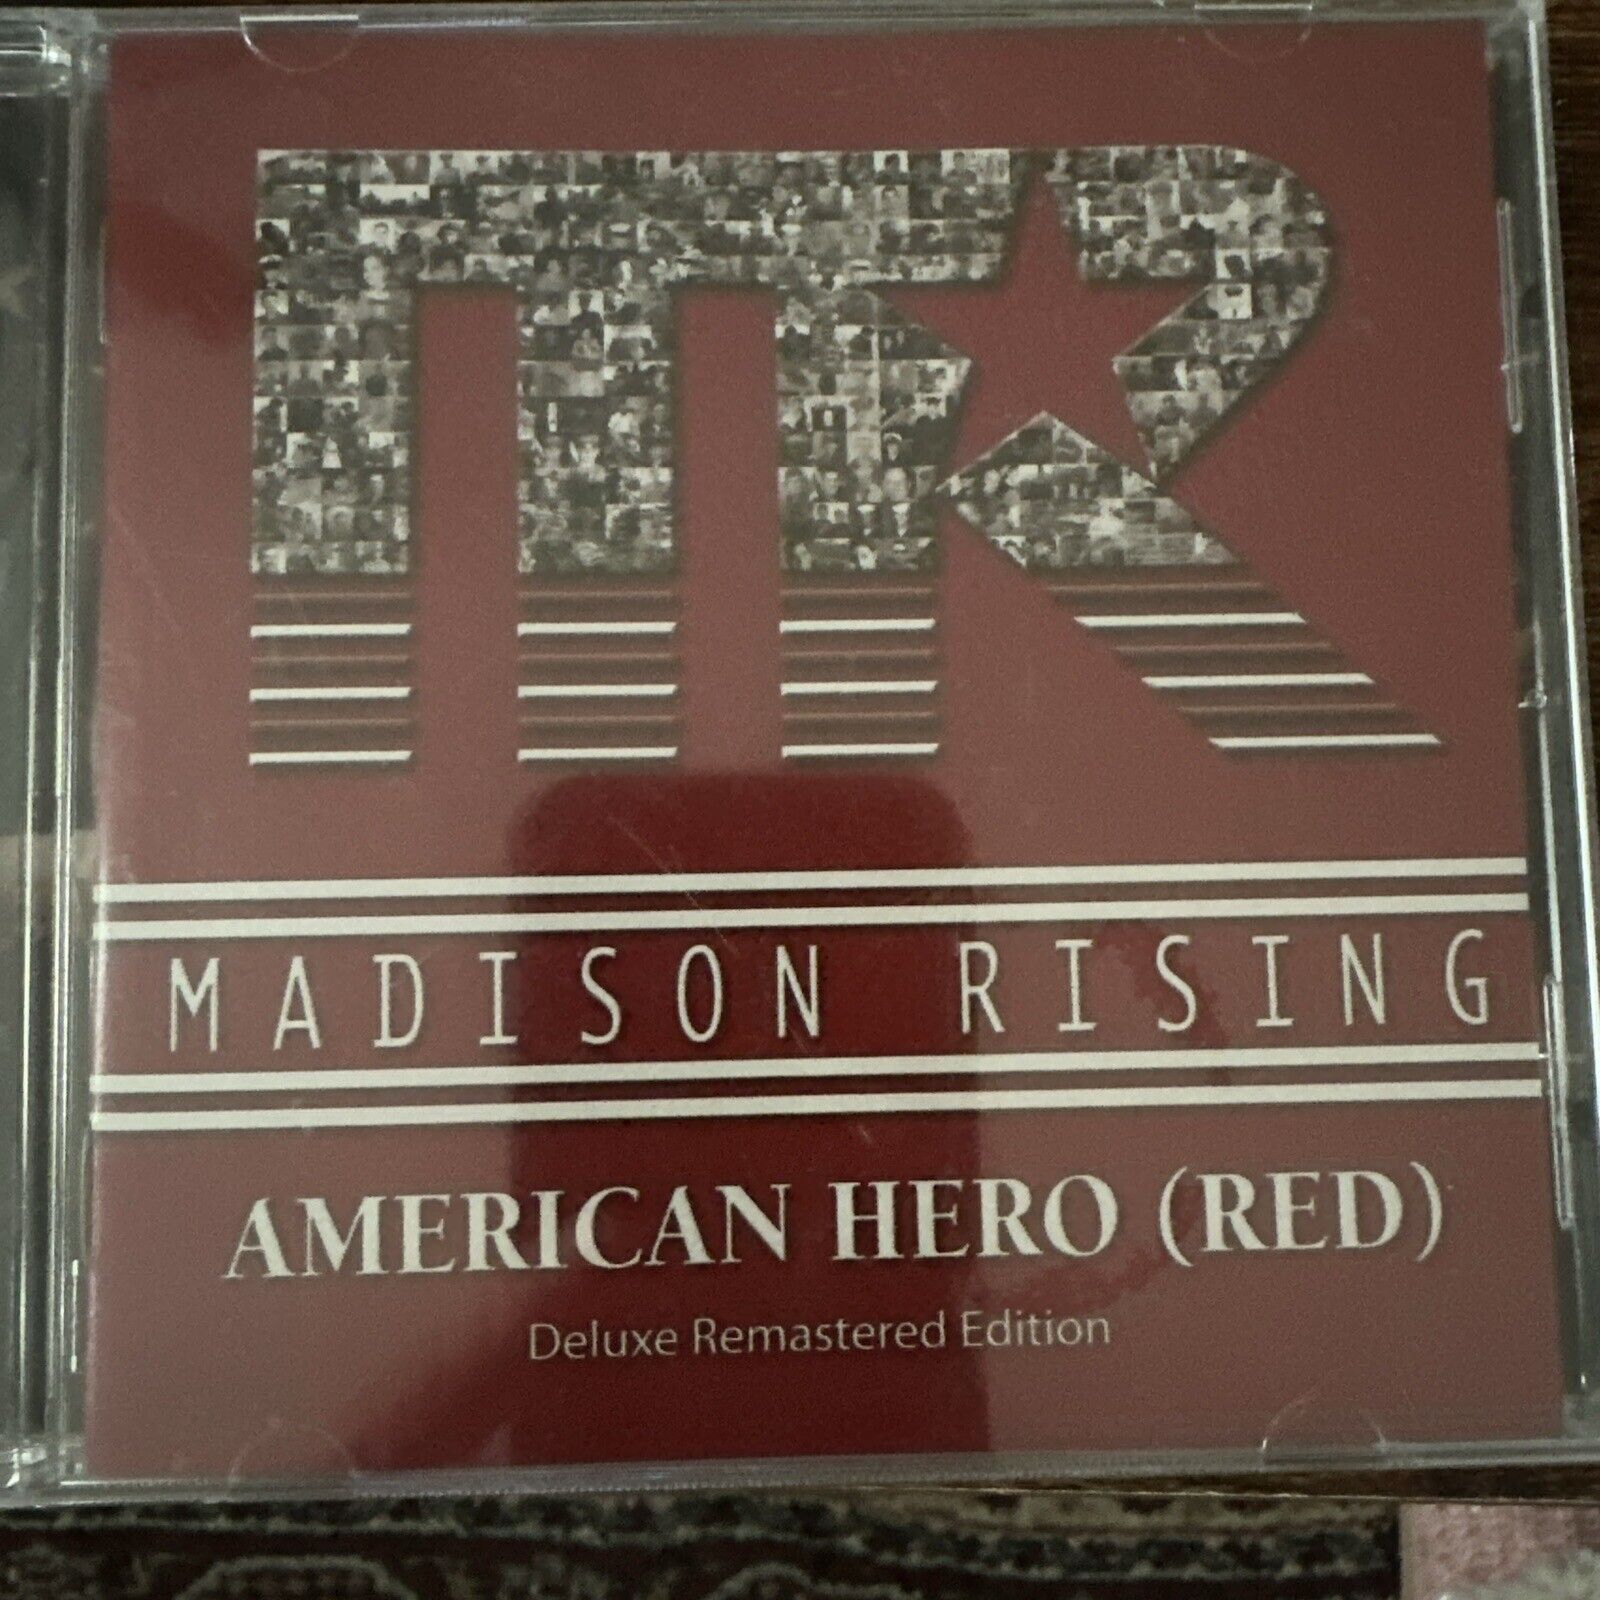 American Hero (Red) by Madison Rising (CD, 2015) Sealed